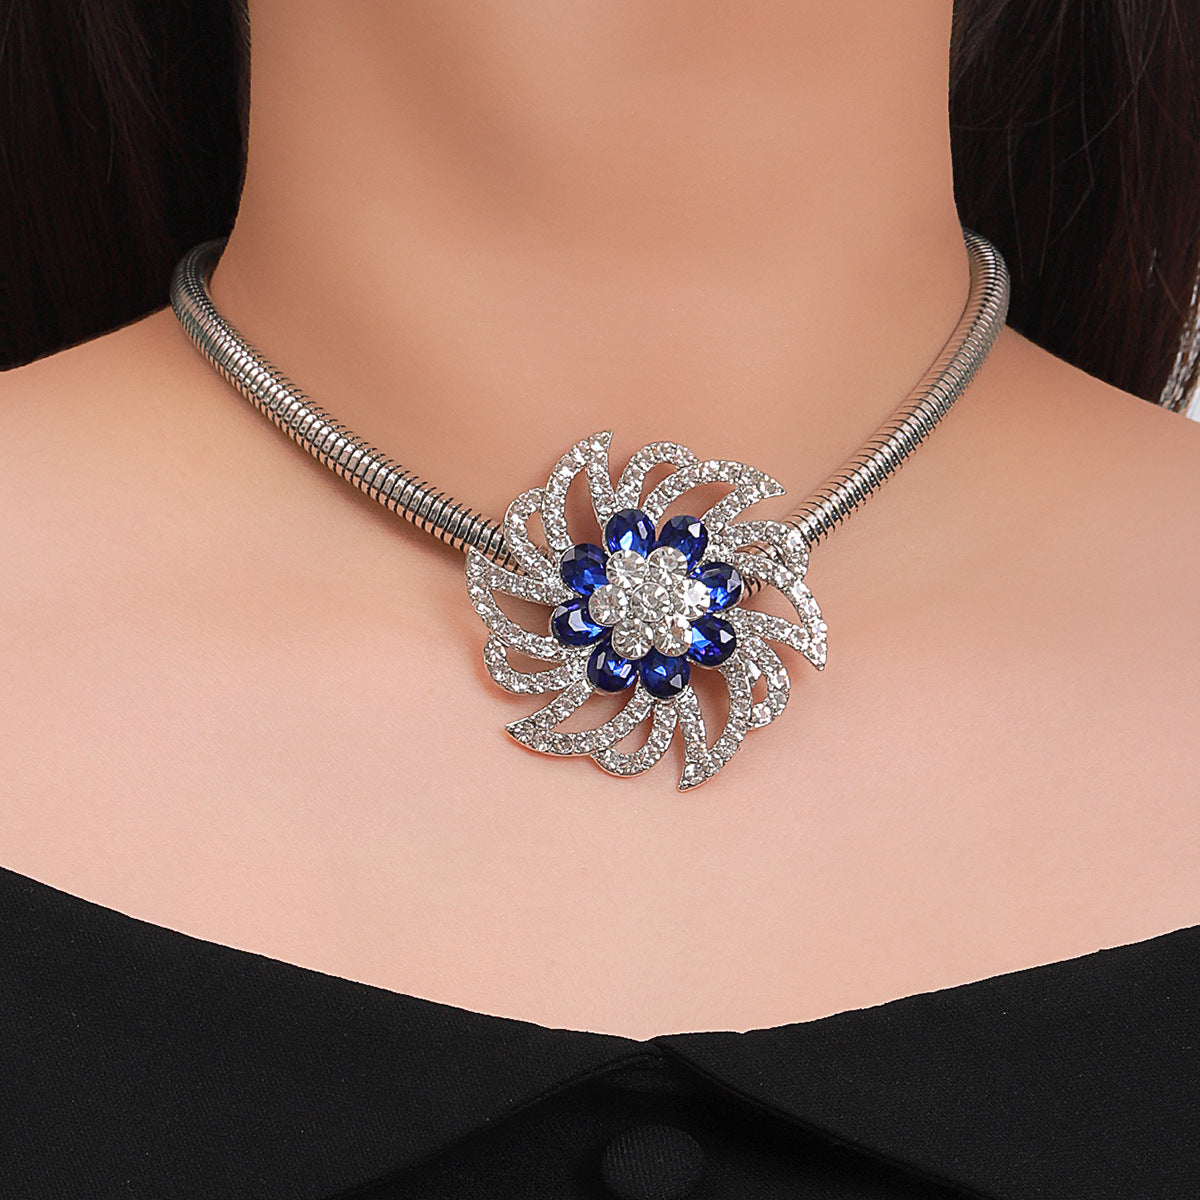 Zircon Hollow Flower Collarbone Chain Necklace with European and American Design